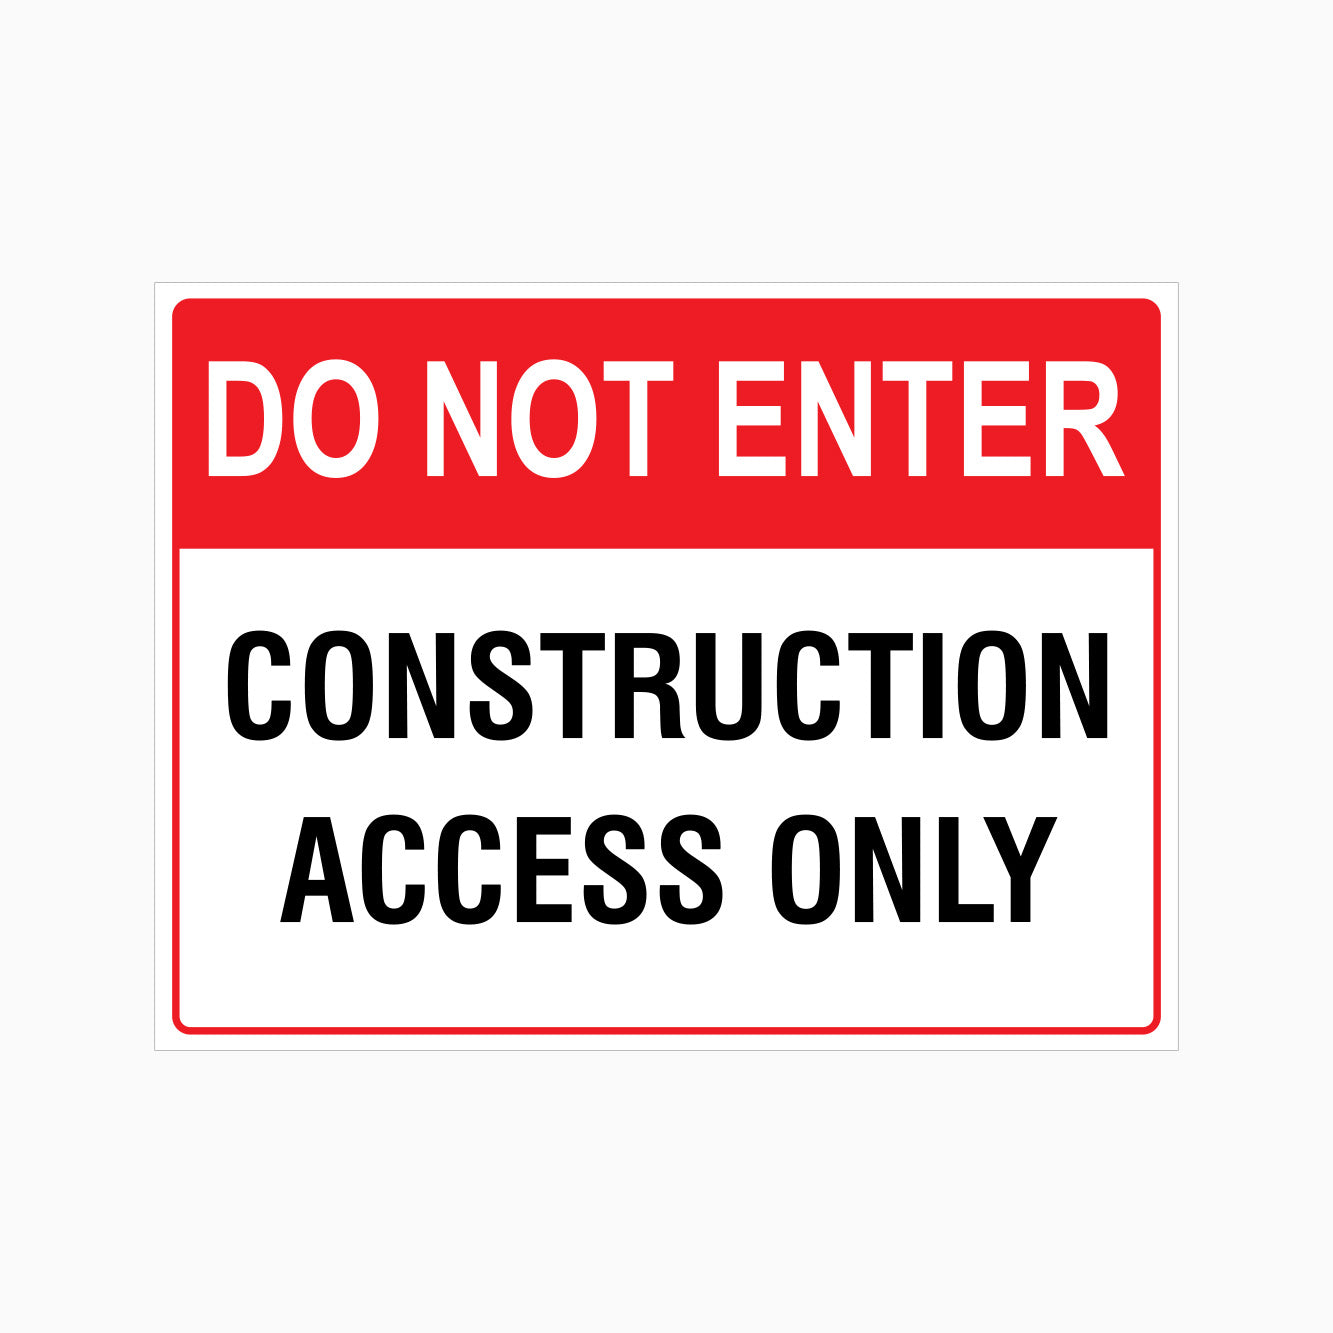 DO NOT ENTER - CONSTRUCTION ACCESS ONLY SIGN